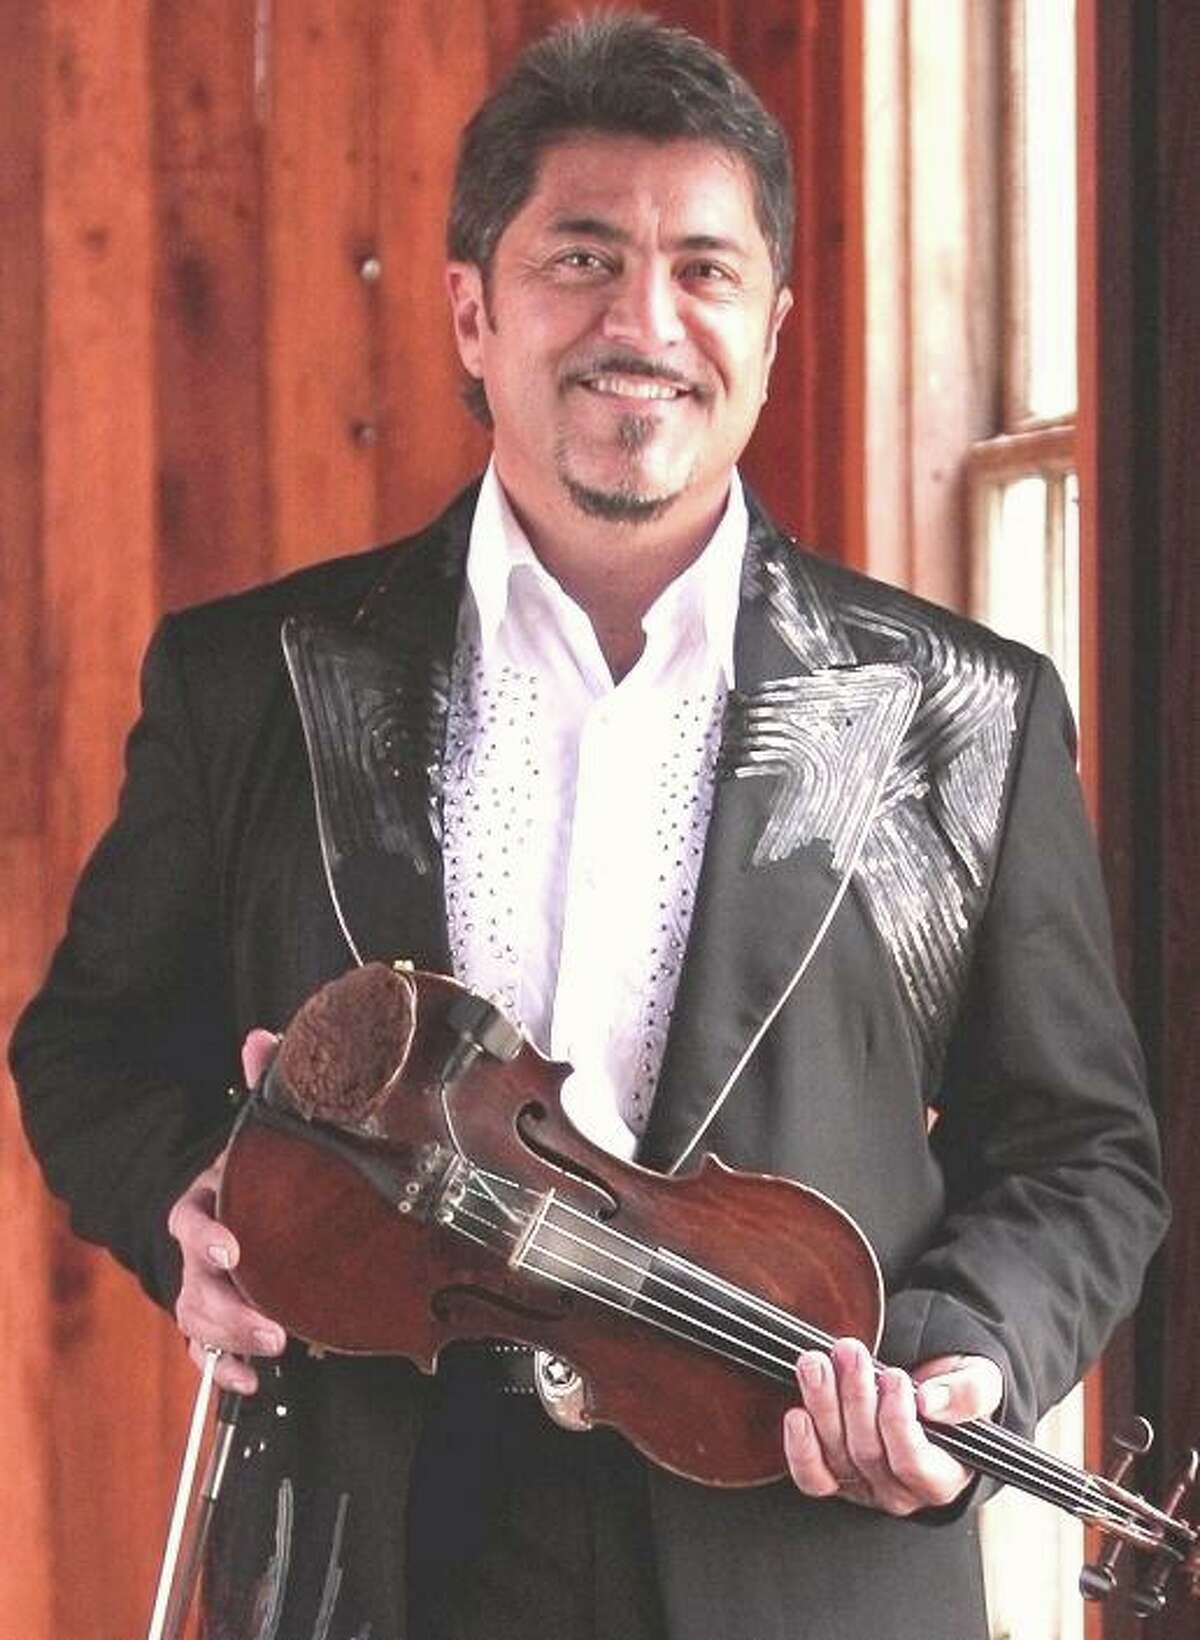 Conroe concert promoters Gene and Betty Wolf are helping longtime musician Bobby Flores in his fight against Stage IV Esophageal Cancer. They have secured a guitar signed by George Strait and a violin signed by Ray Price to auction off for Flores benefit.